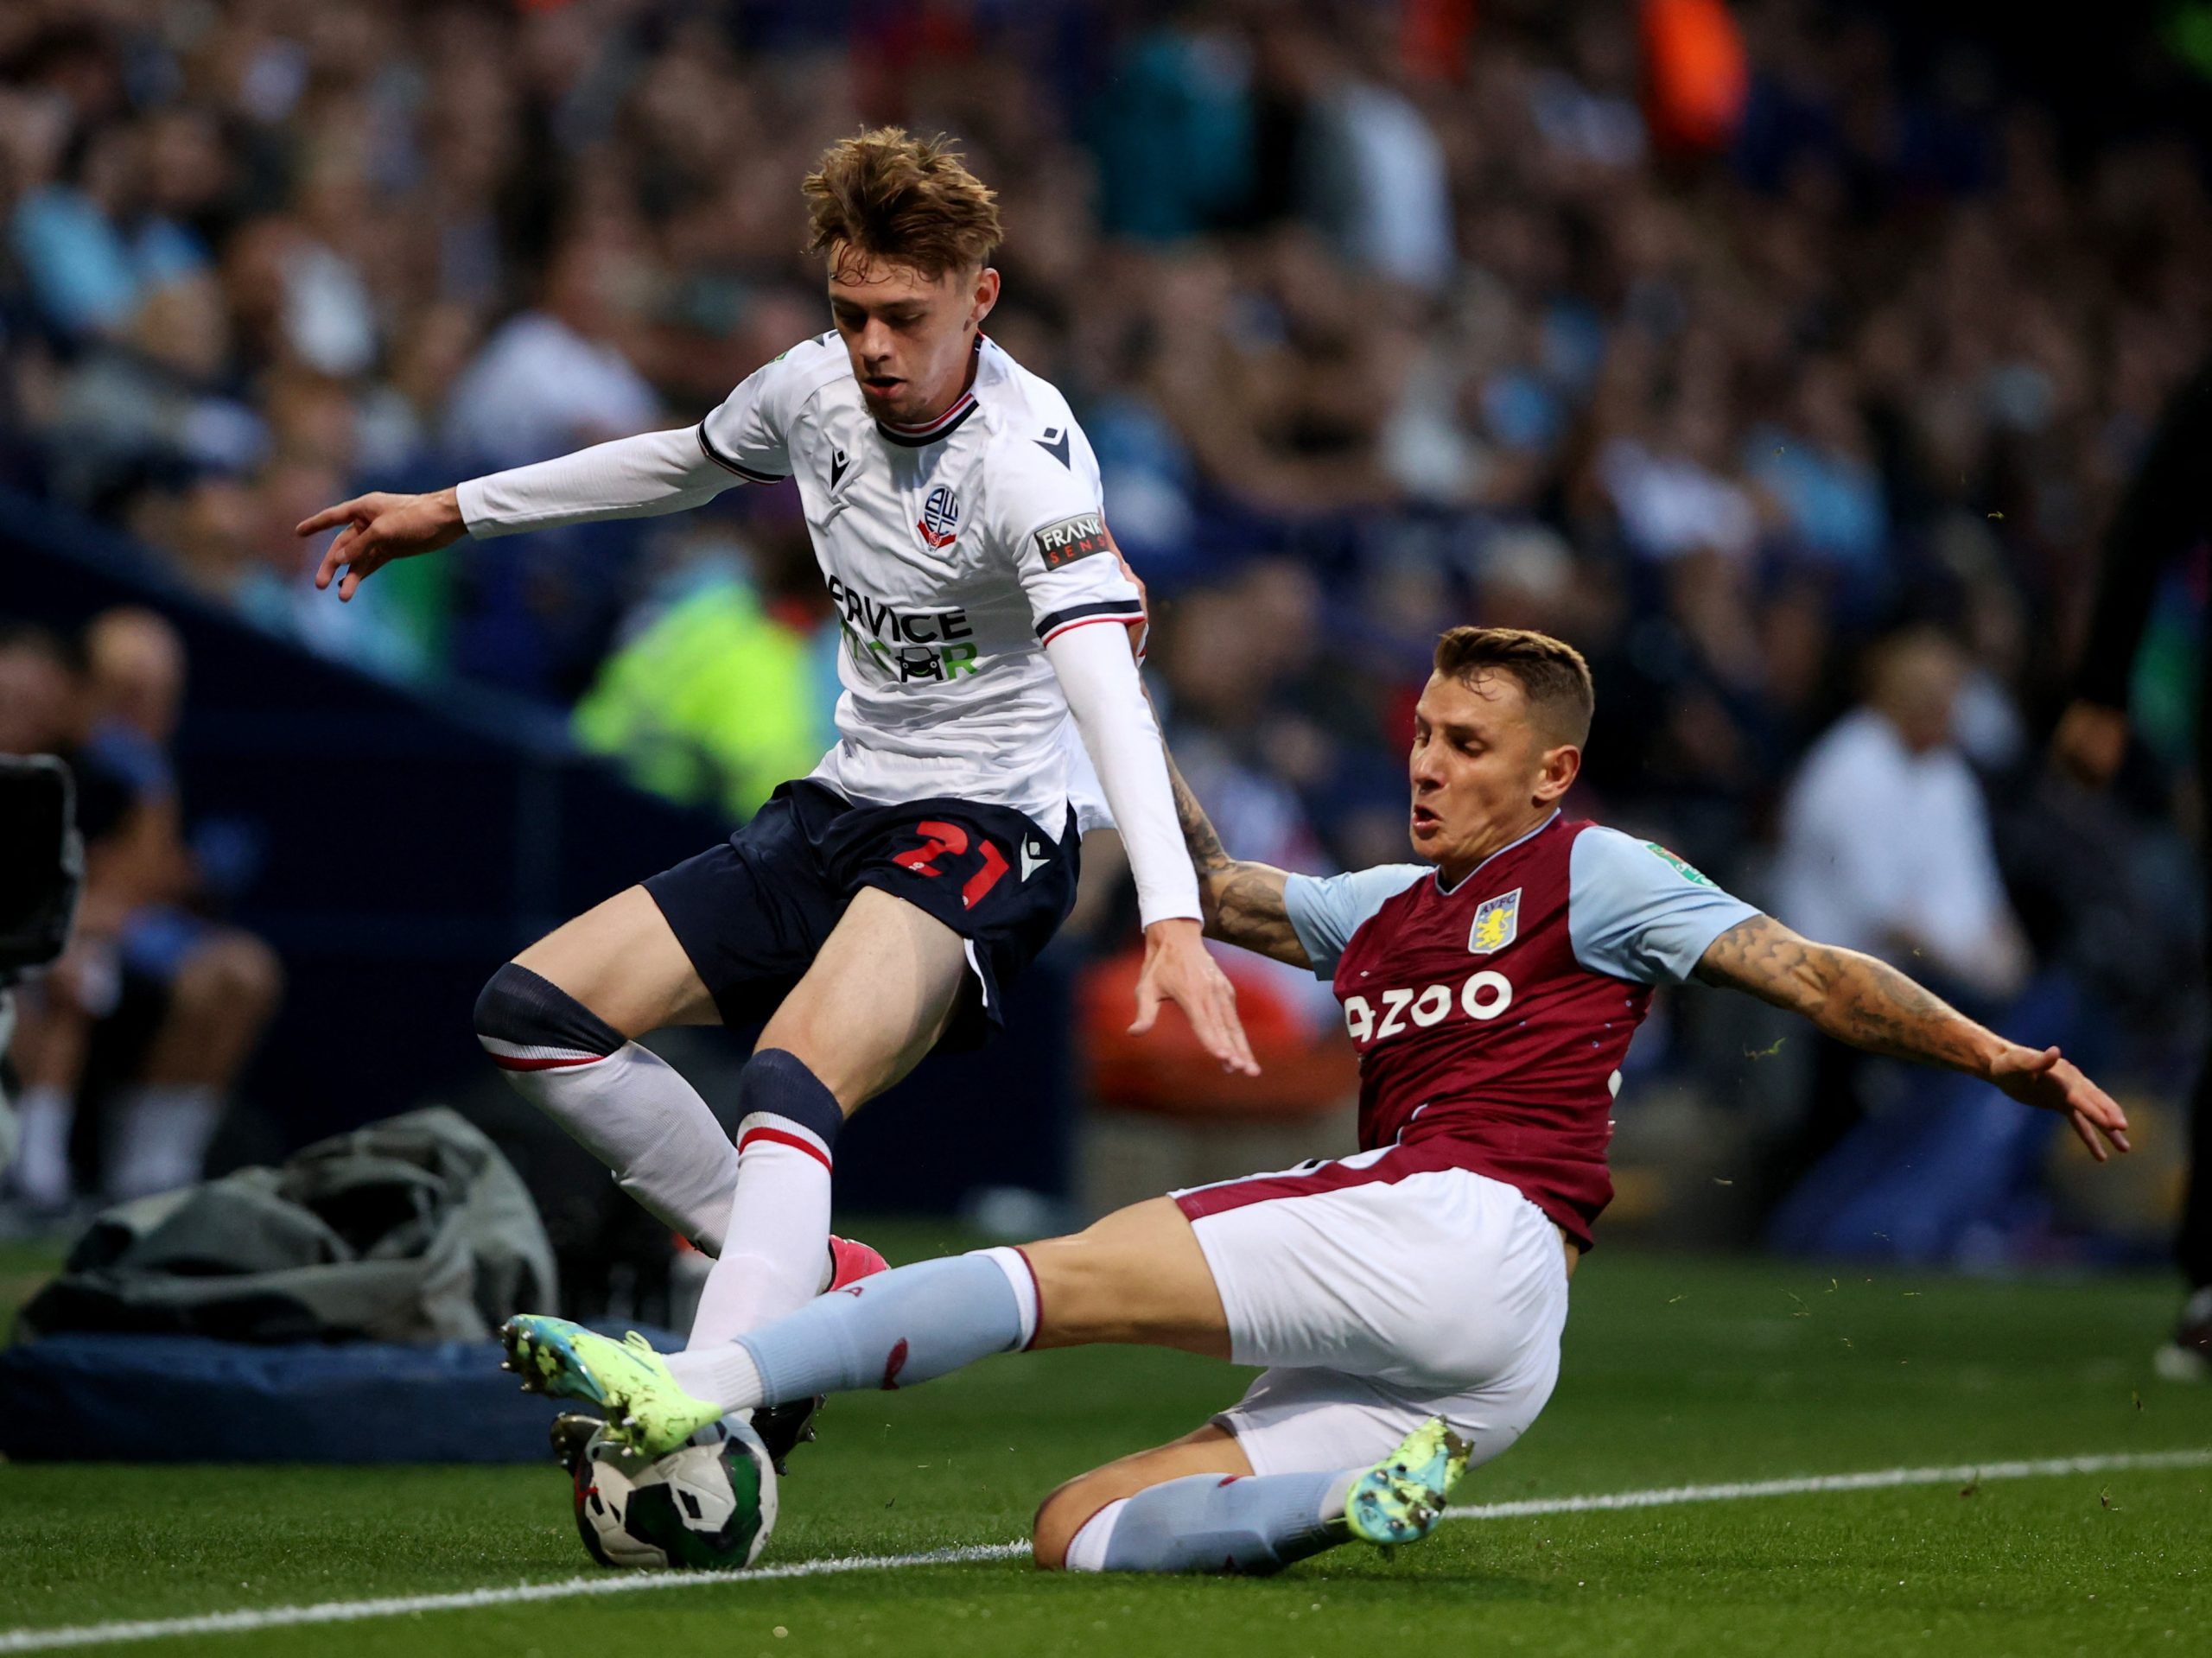 Soccer Football - Carabao Cup Second Round - Bolton Wanderers v Aston Villa - University of Bolton Stadium, Bolton, Britain - August 23, 2022 Bolton Wanderers' Conor Bradley in action with Aston Villa's Lucas Digne Action Images via Reuters/Molly Darlington EDITORIAL USE ONLY. No use with unauthorized audio, video, data, fixture lists, club/league logos or 'live' services. Online in-match use limited to 75 images, no video emulation. No use in betting, games or single club /league/player publica